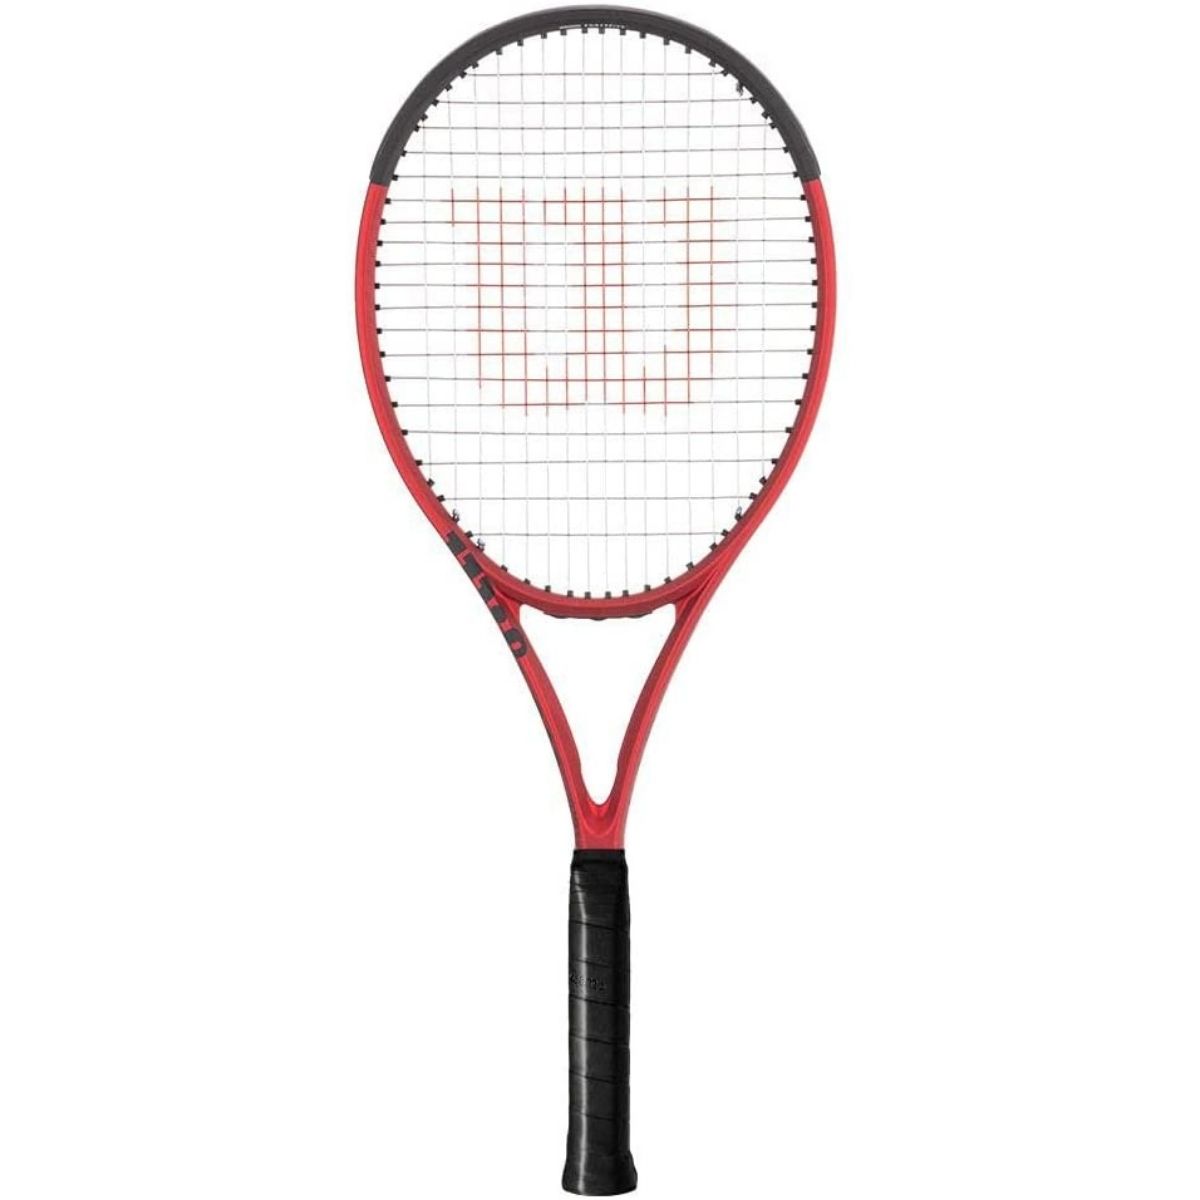 The Best Rackets for One Handed Backhand Options: Wilson Clash 100